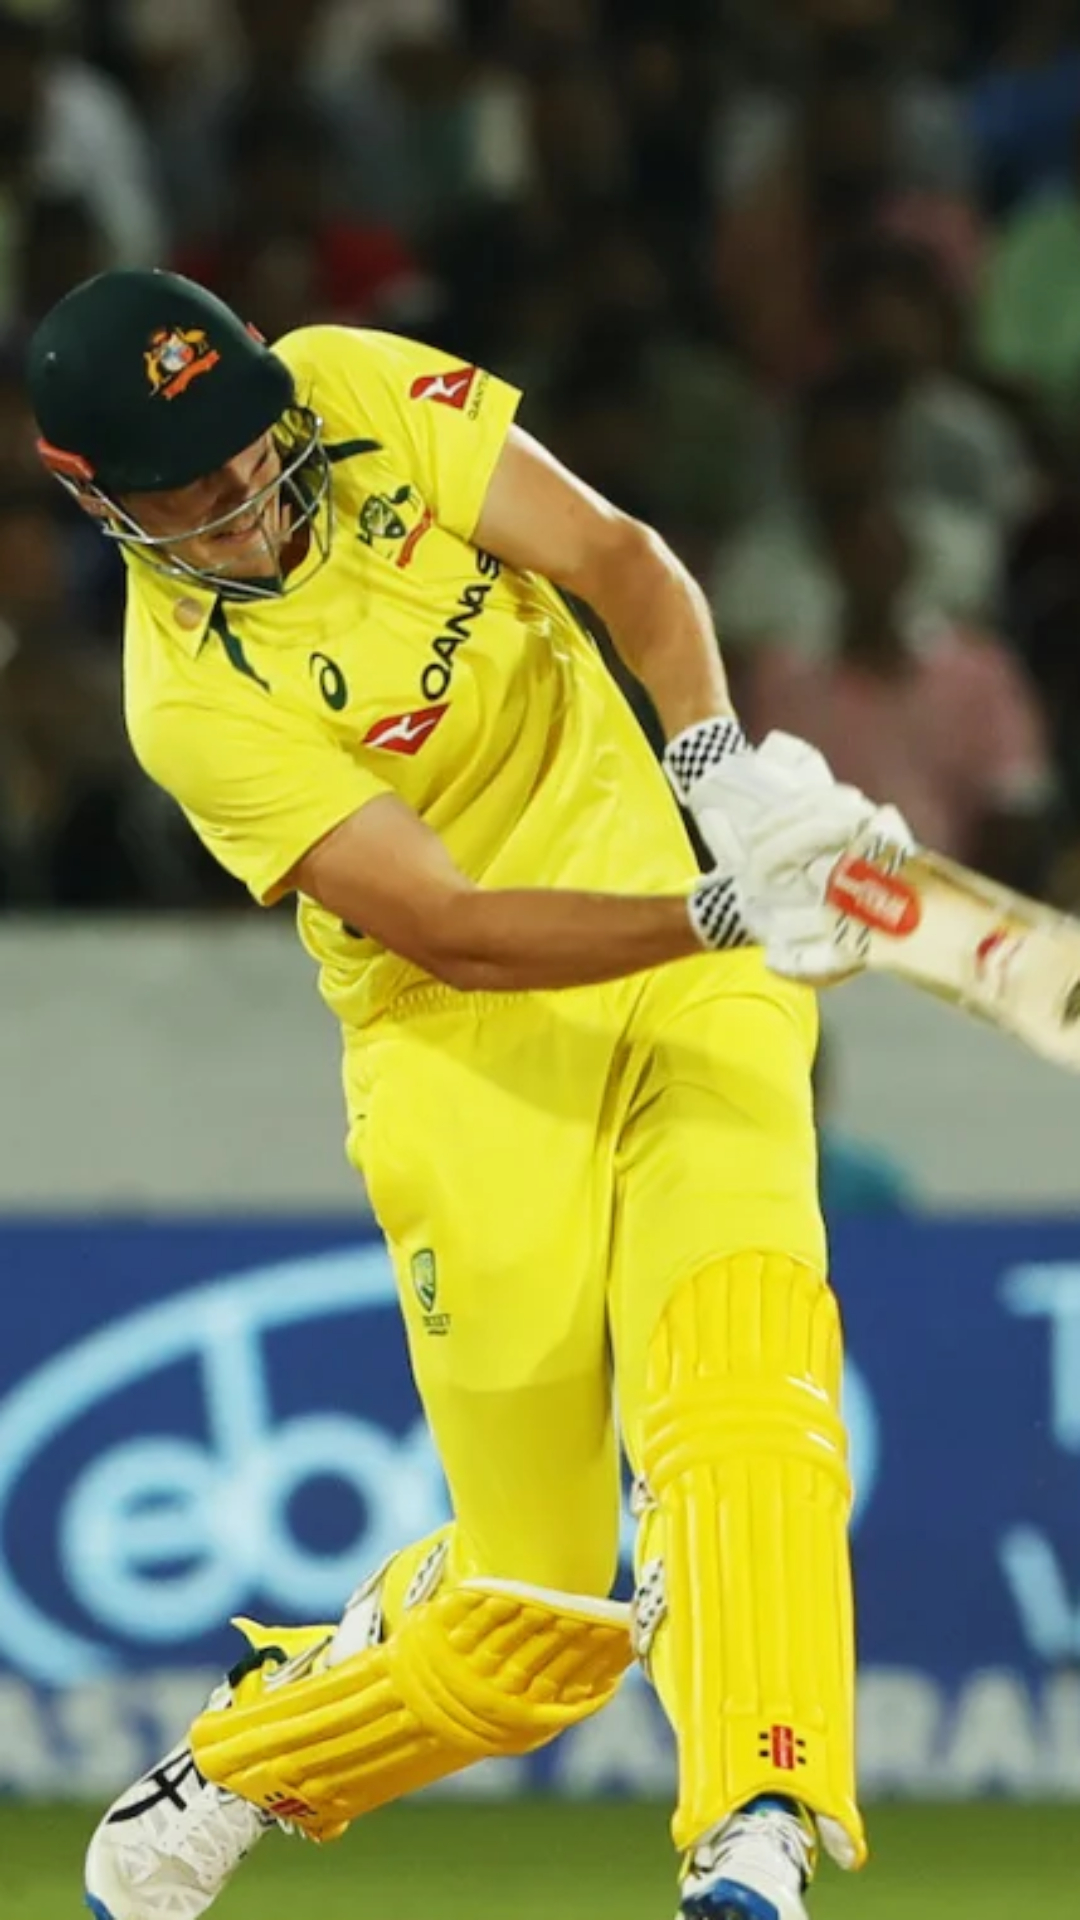 After Cameron Green's 50 off 19 balls; here's list of fastest T20I 50s for Australia